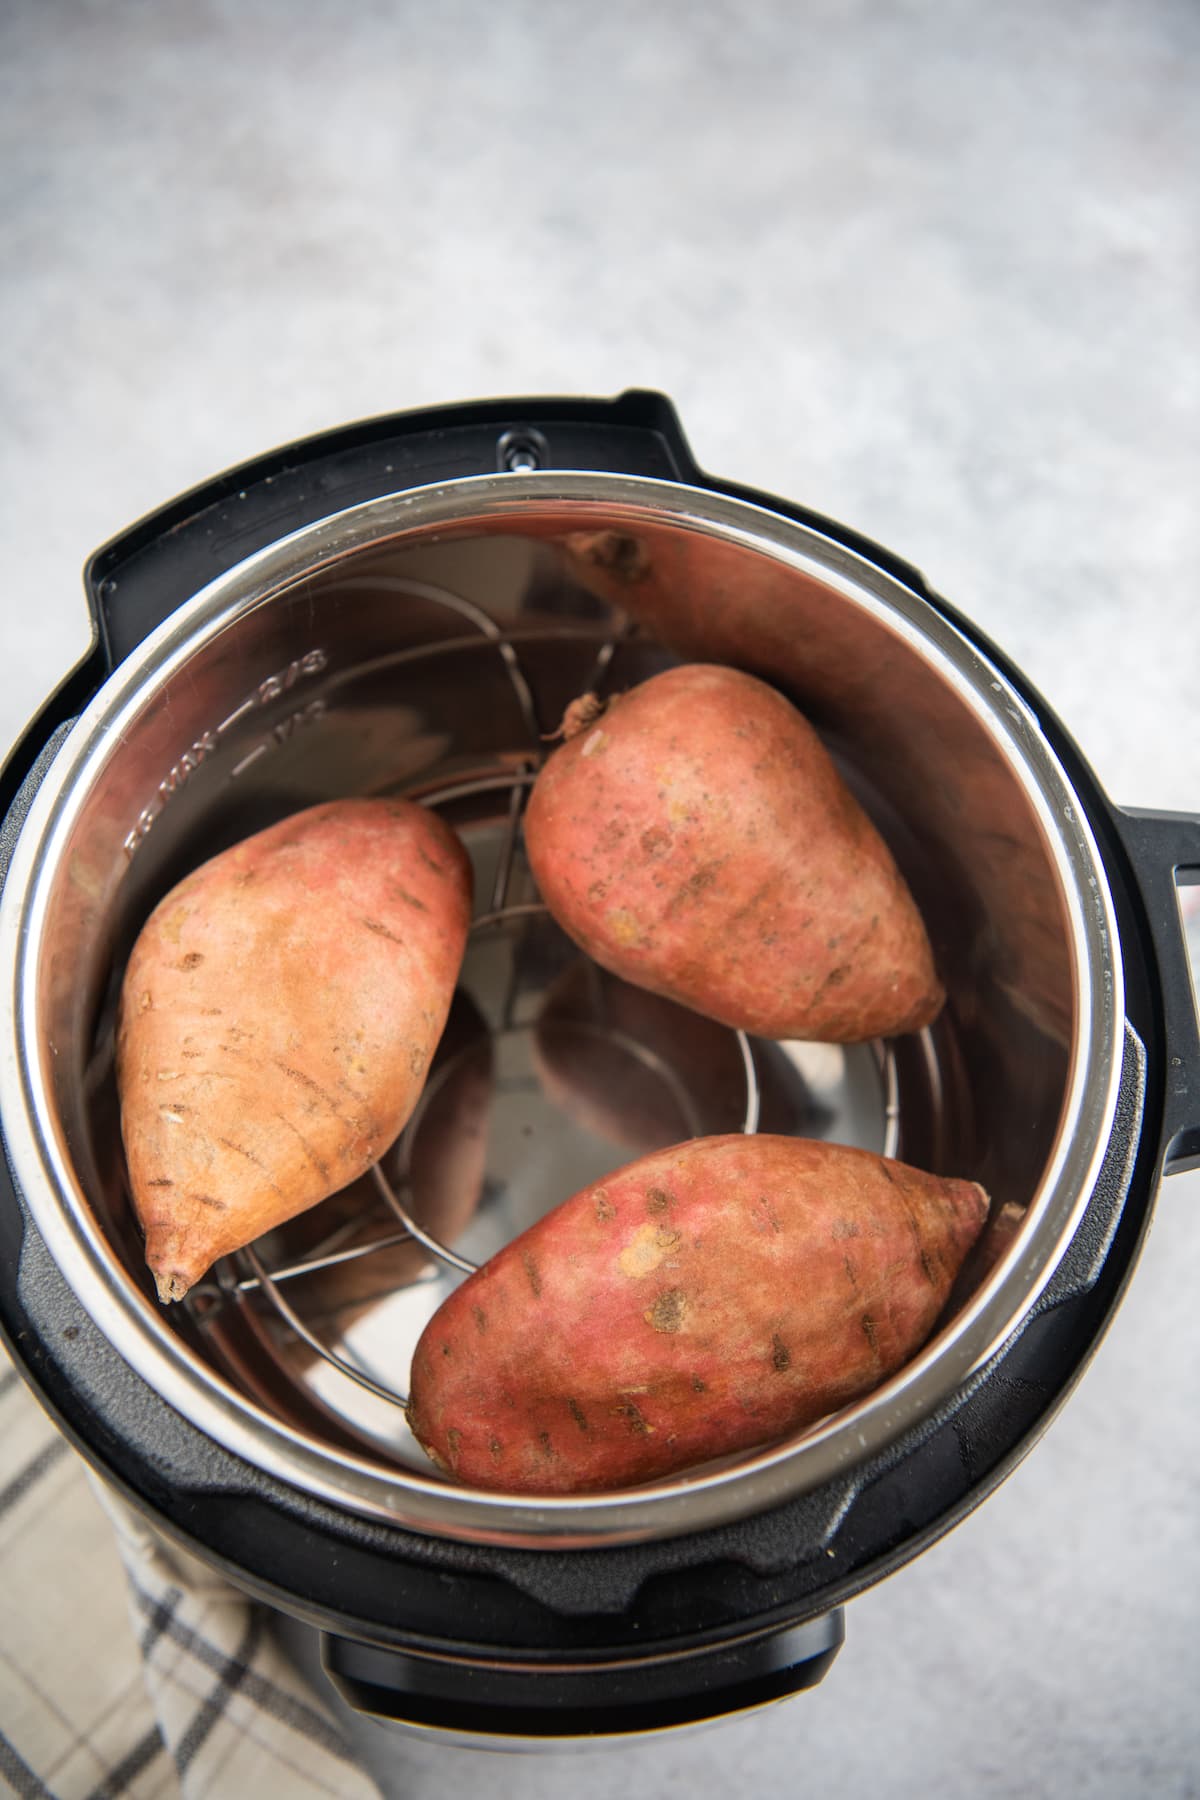 Three sweet potatoes in an instant pot sitting on a trivet.